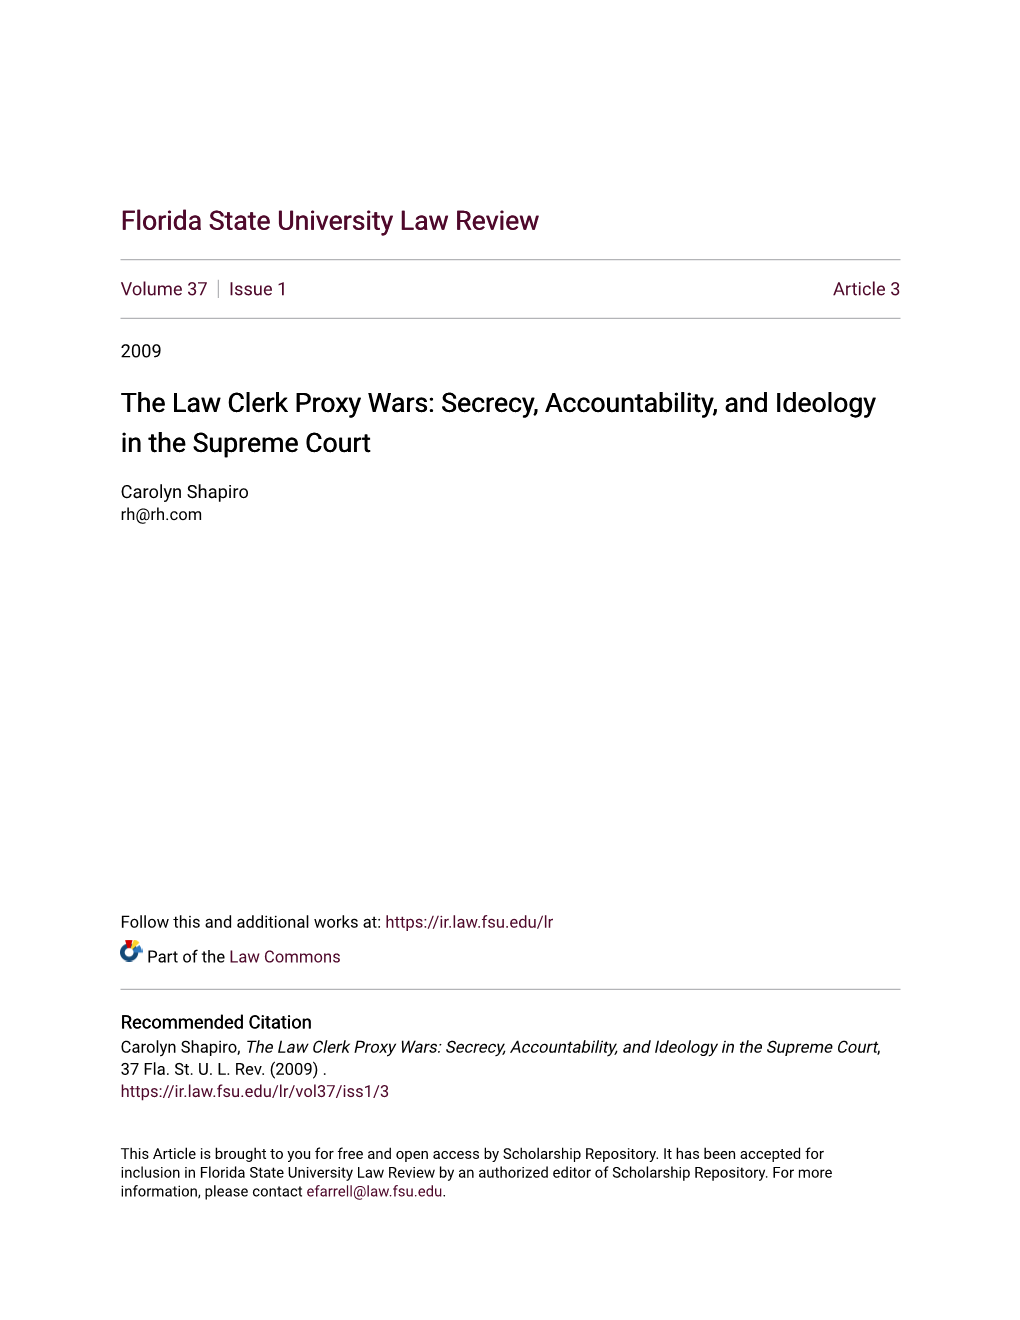 The Law Clerk Proxy Wars: Secrecy, Accountability, and Ideology in the Supreme Court